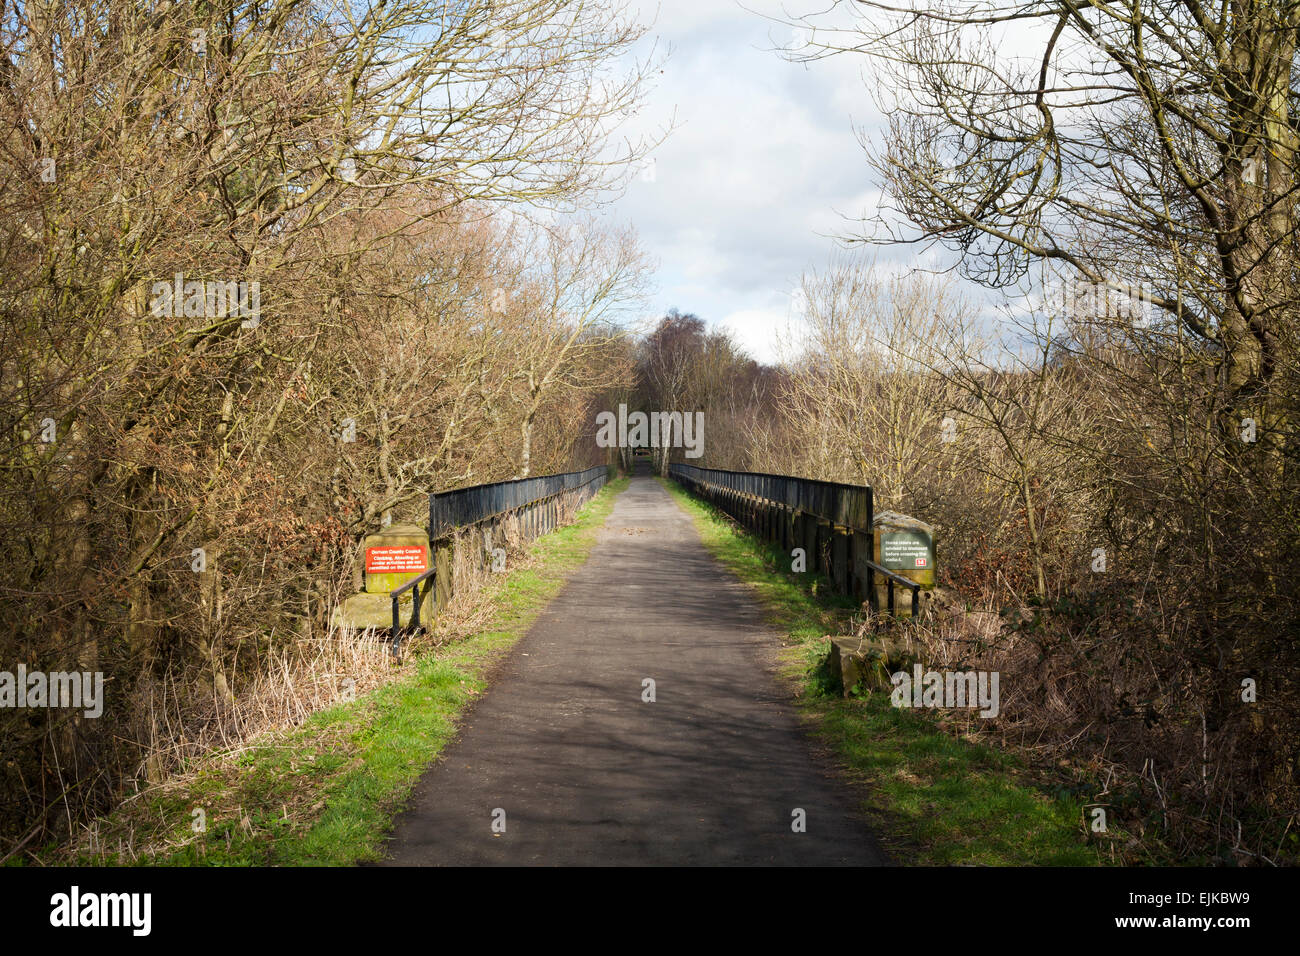 The Derwent Walk and Coast to Coast cycle route crossing the Fogoesburn Viaduct in County Durham. Stock Photo